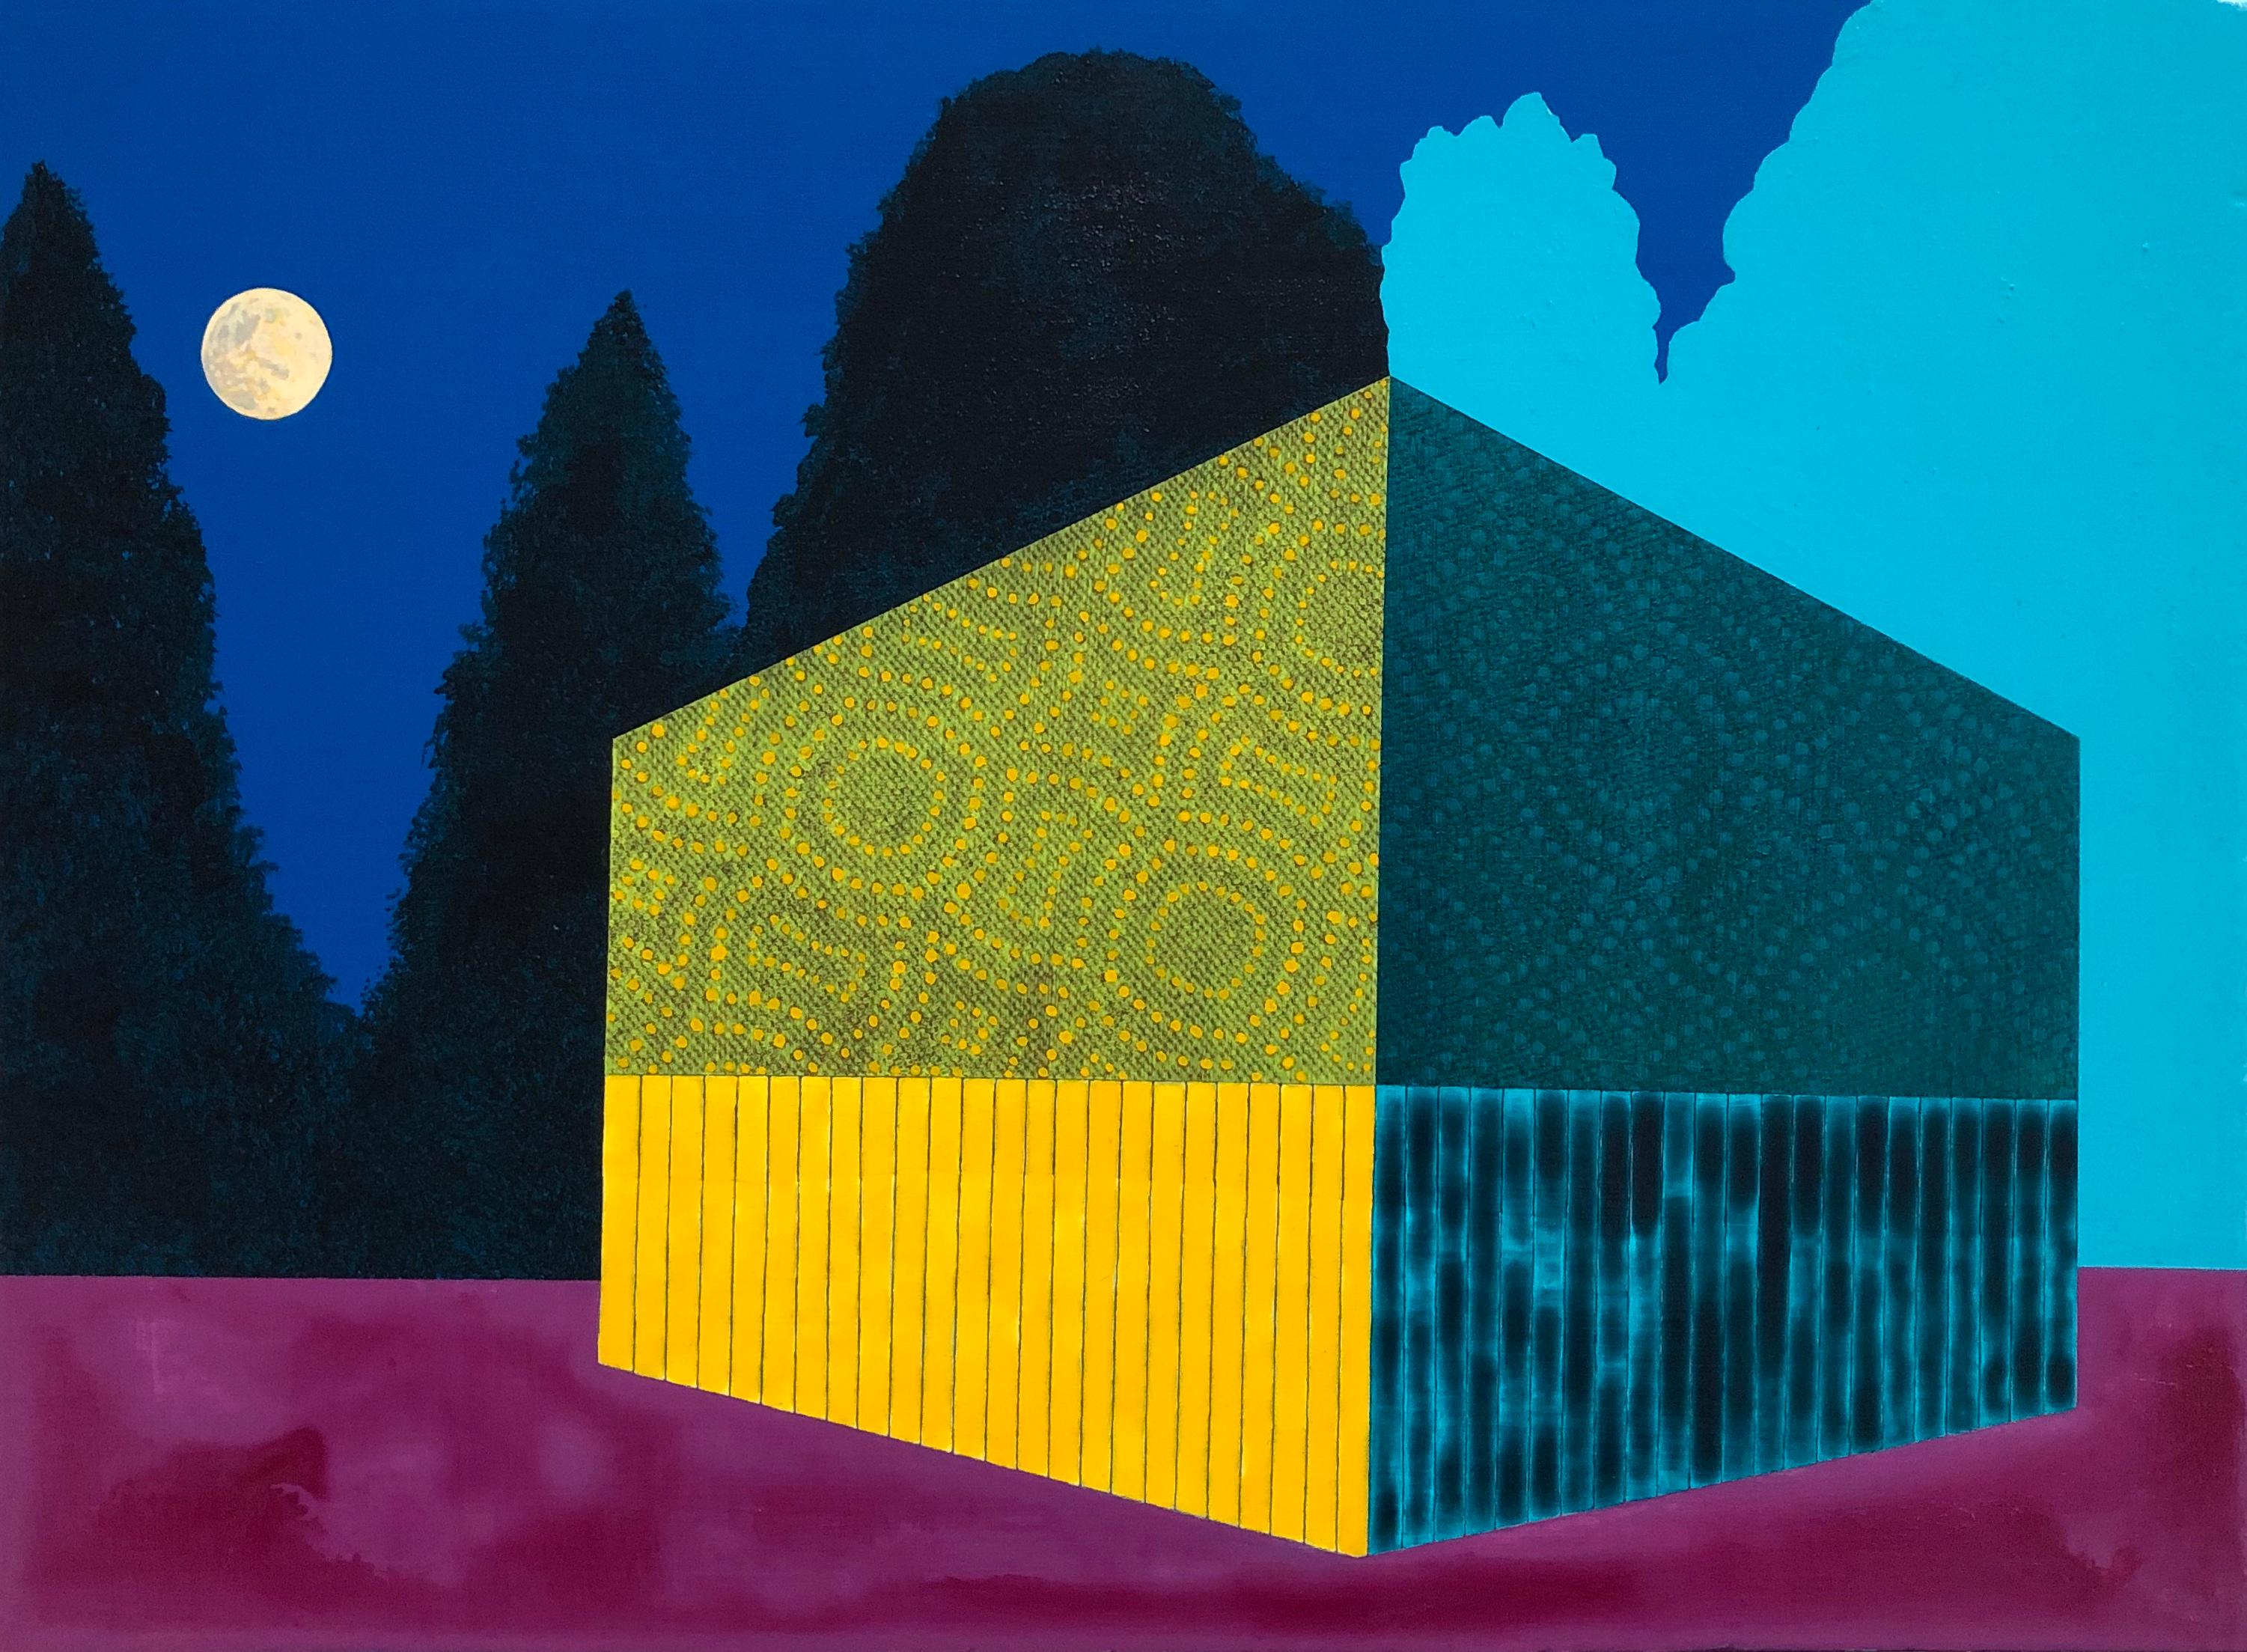 James Isherwood Abstract Painting - Night Scene, blue, yellow and purple building, painting on panel